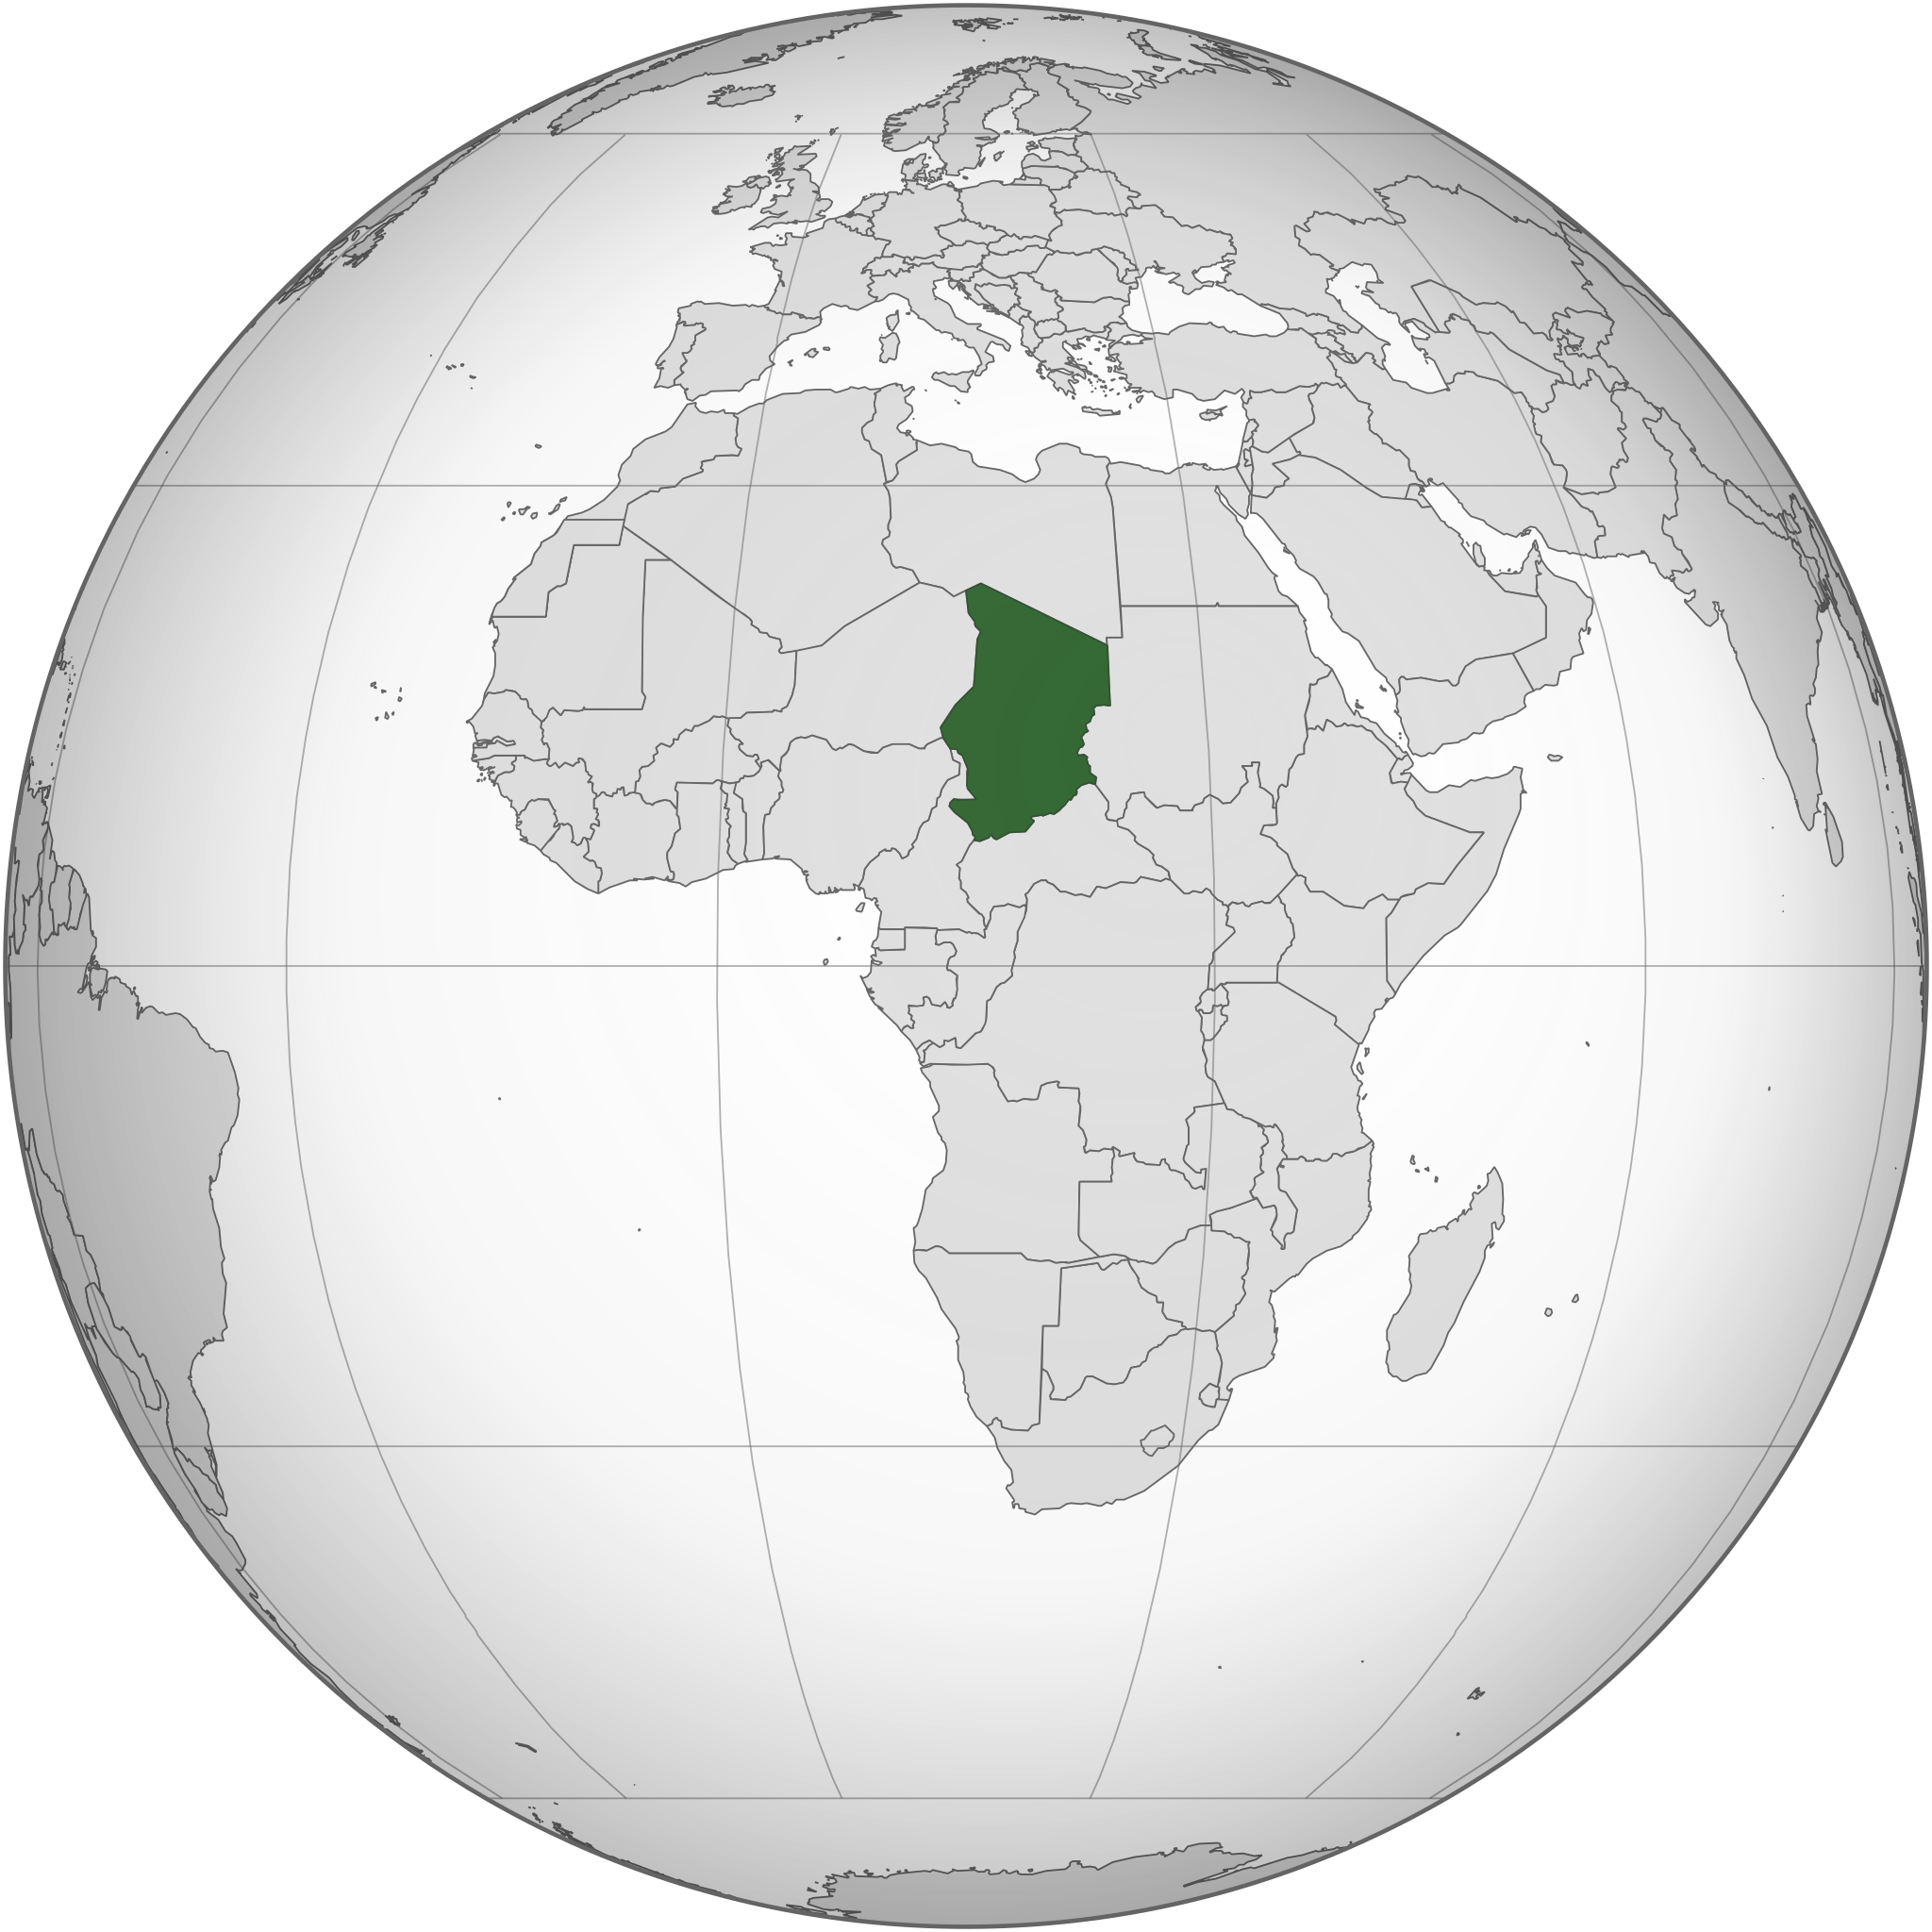 File:Chad map.png